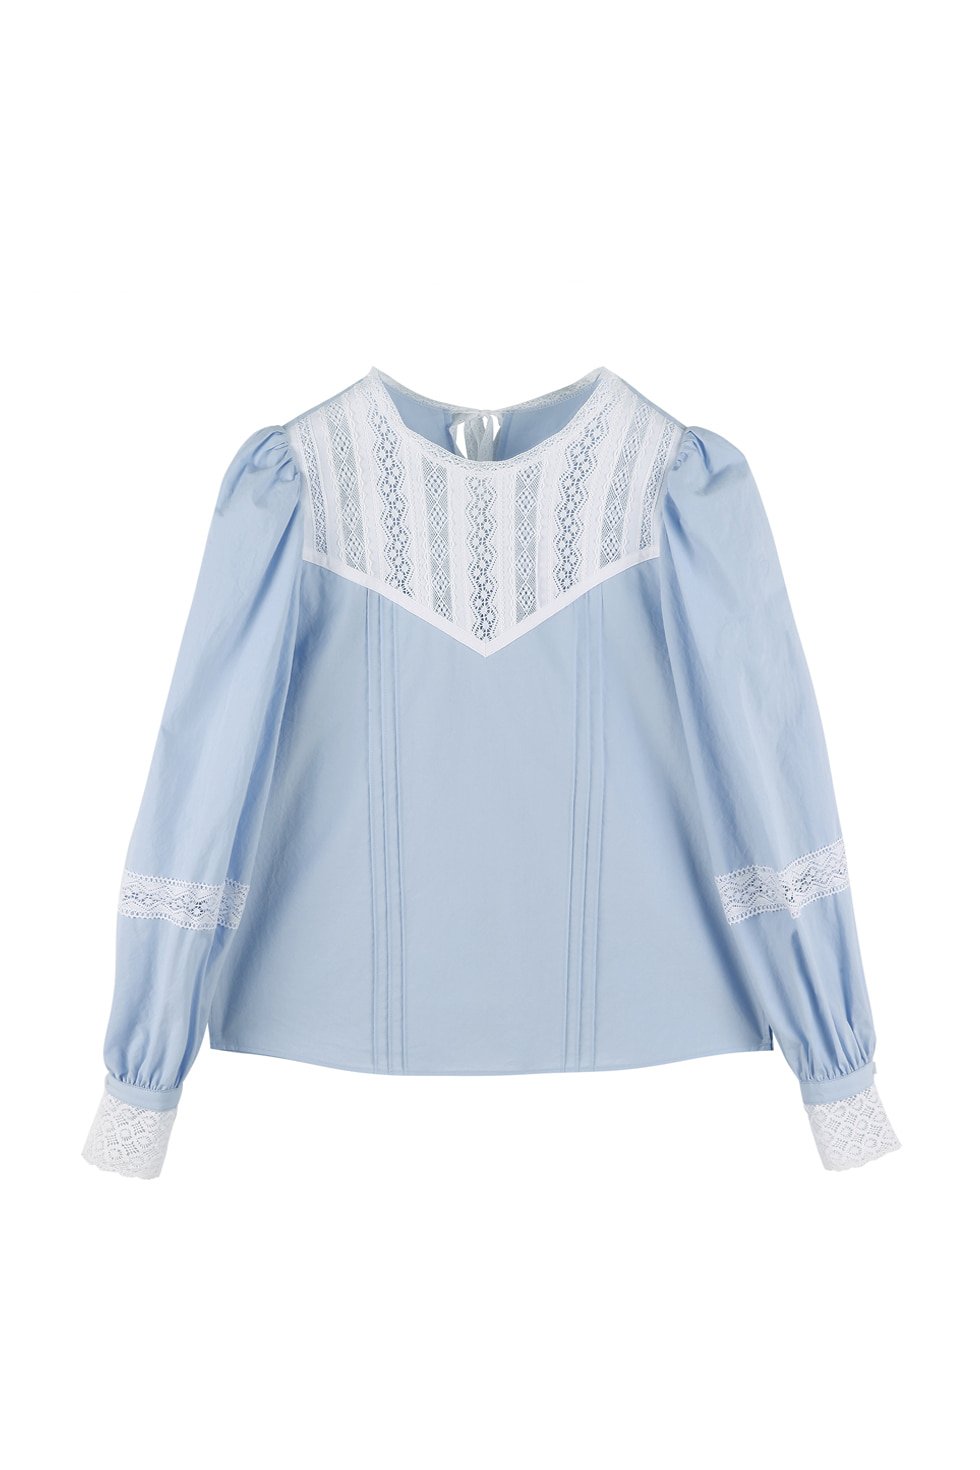 LACE TAPE PUFF BLOUSE - BLUE